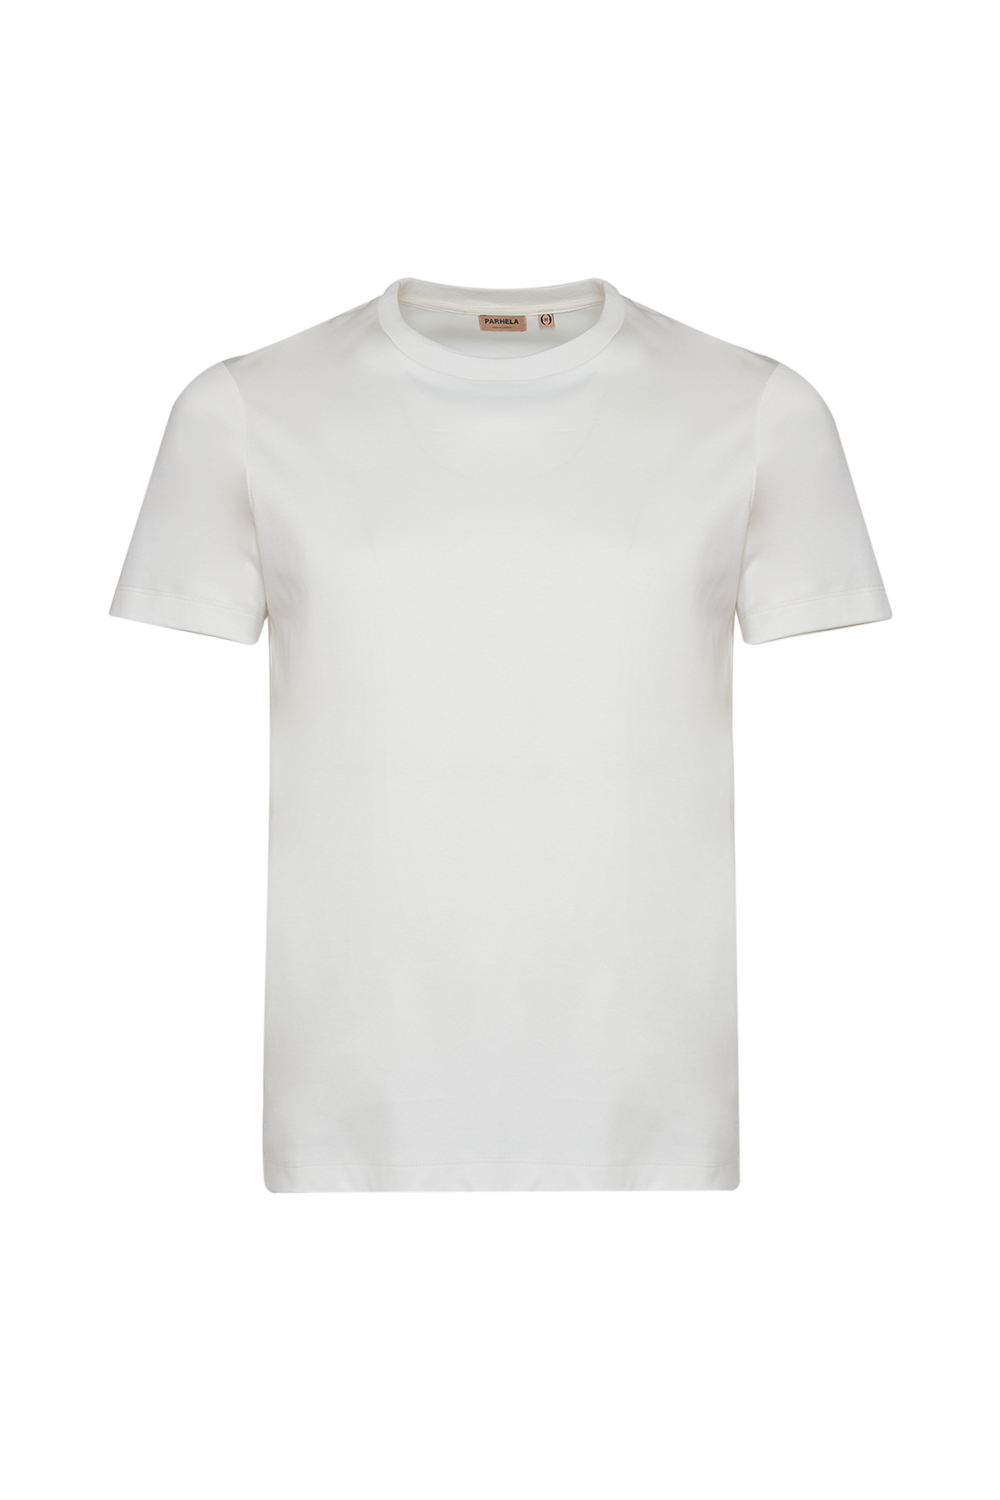 The Pearlescent Tee